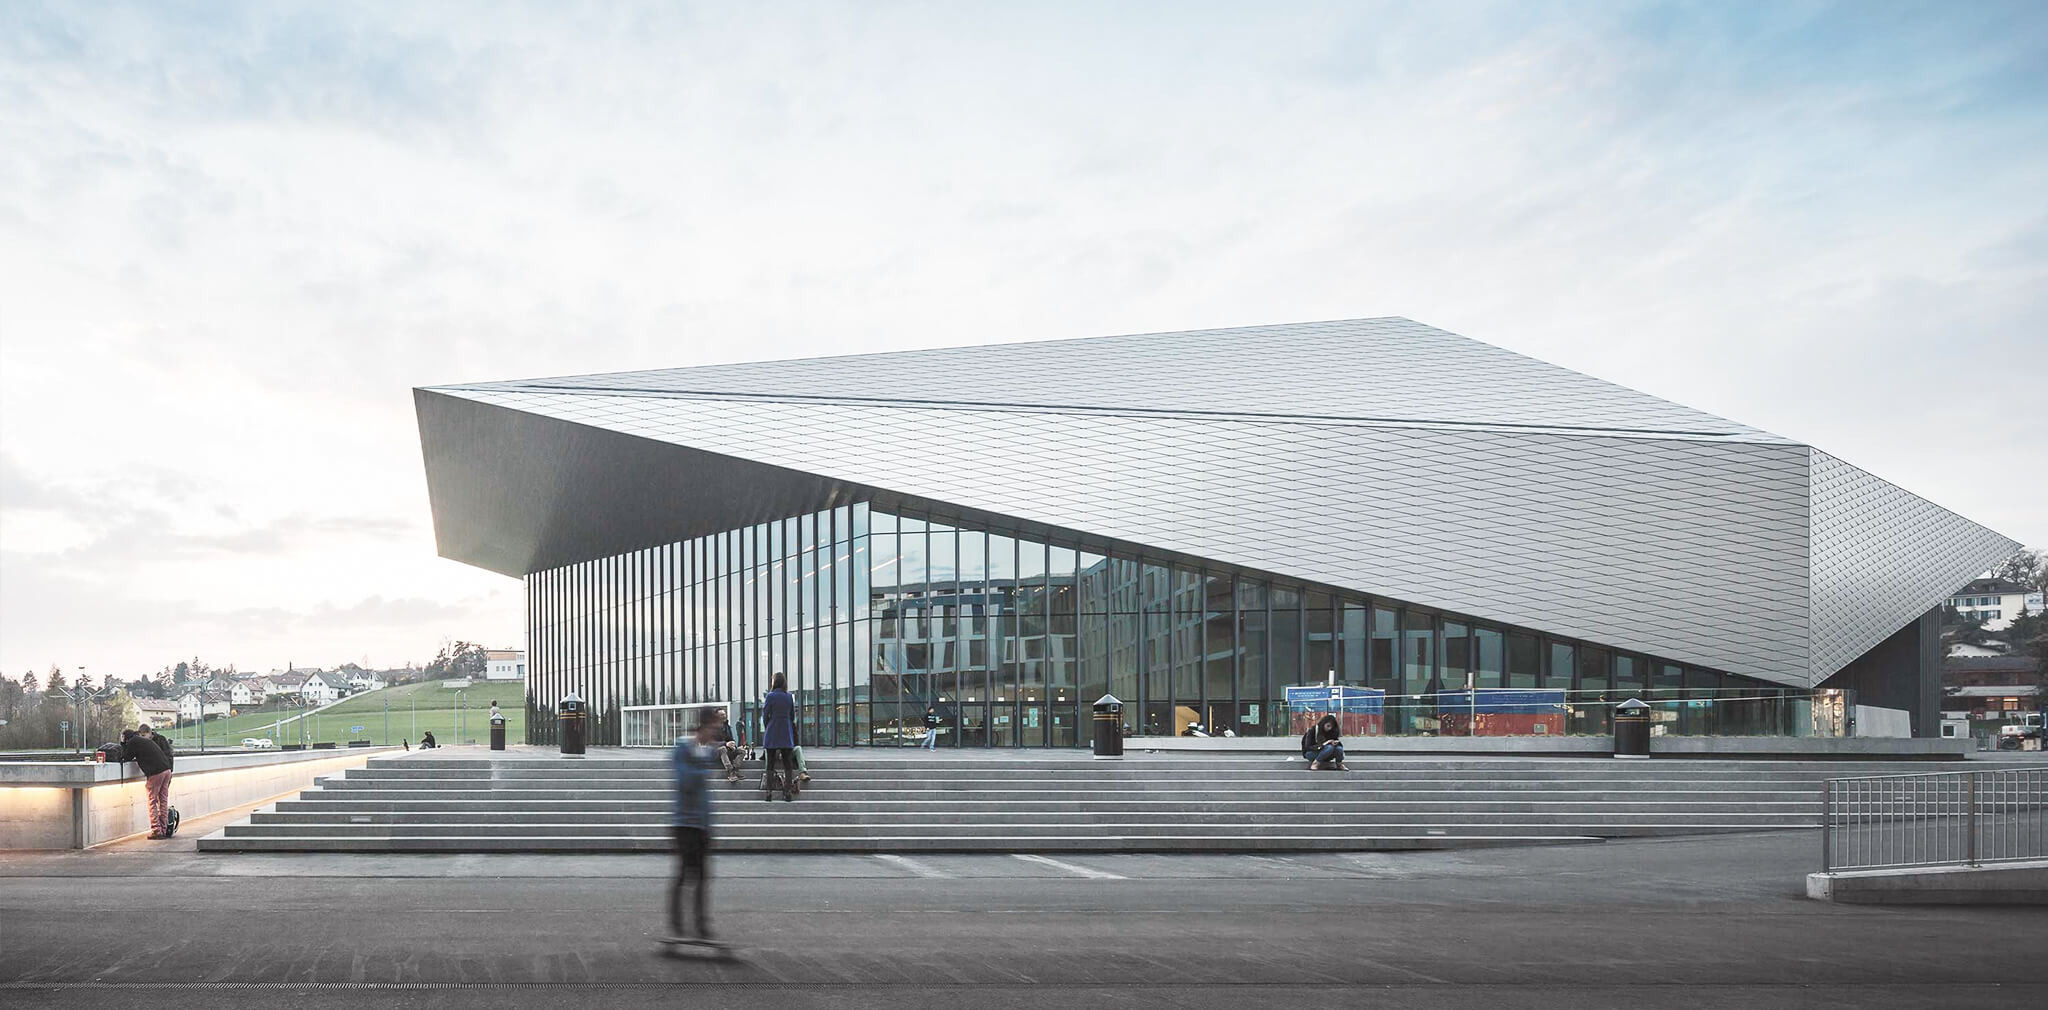 Next week's International Athletes Forum is due to take place at the SwissTech Convention Centre in Lausanne ©STCC